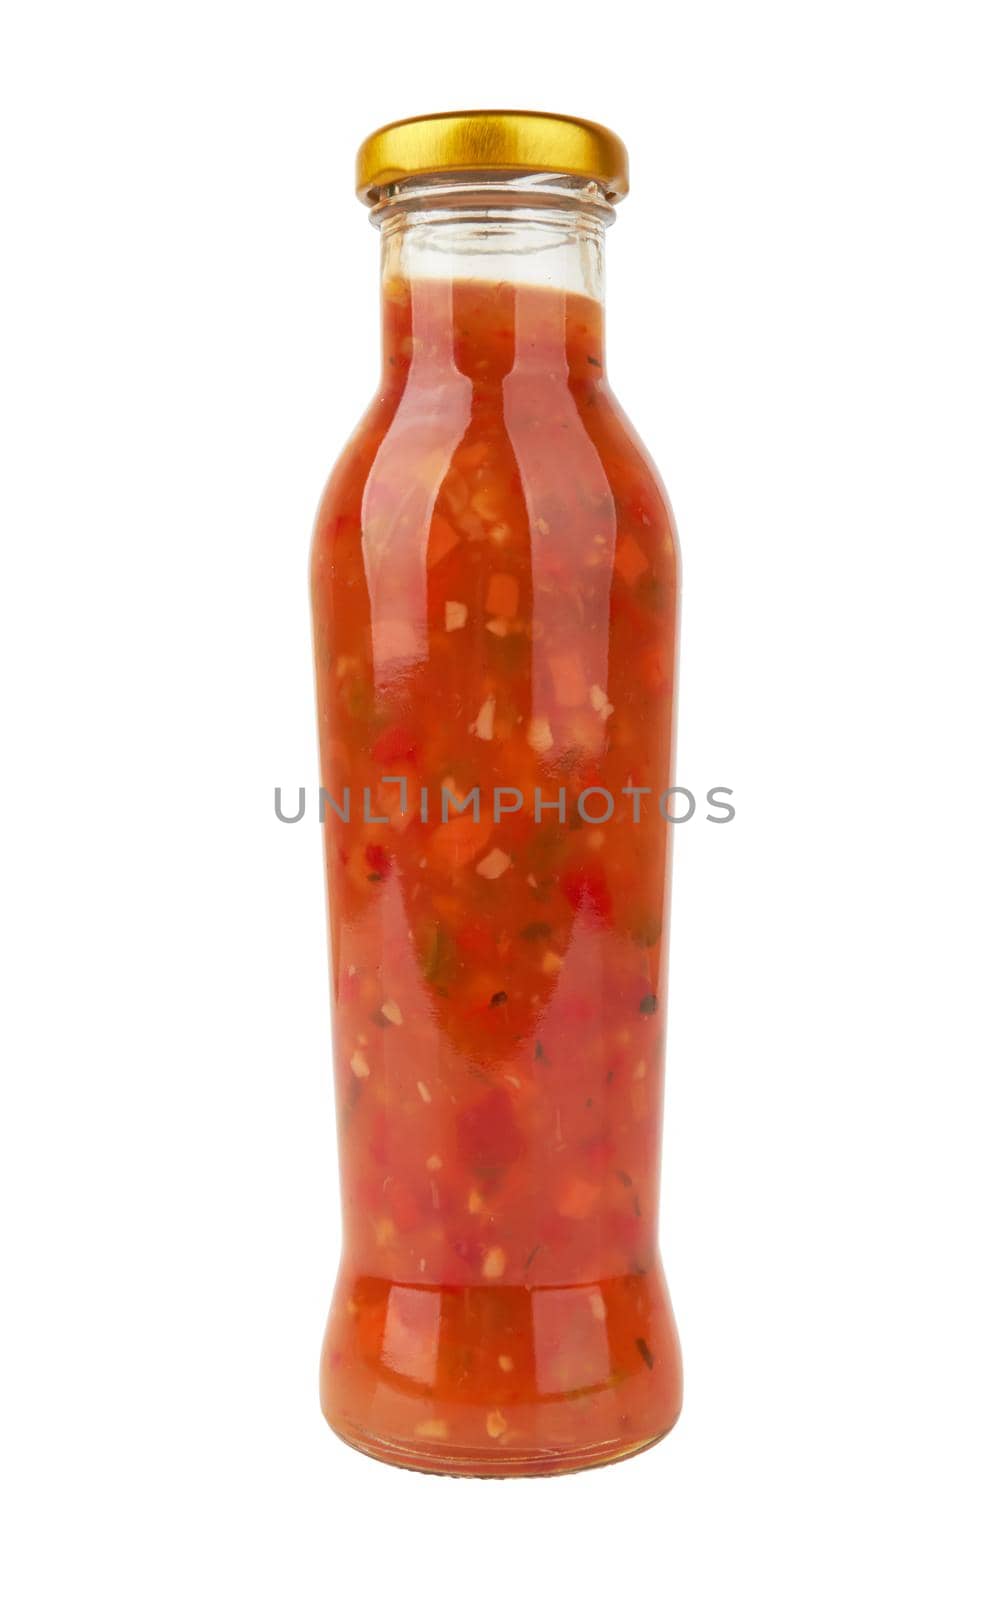 Bottle of tomato sauce by pioneer111